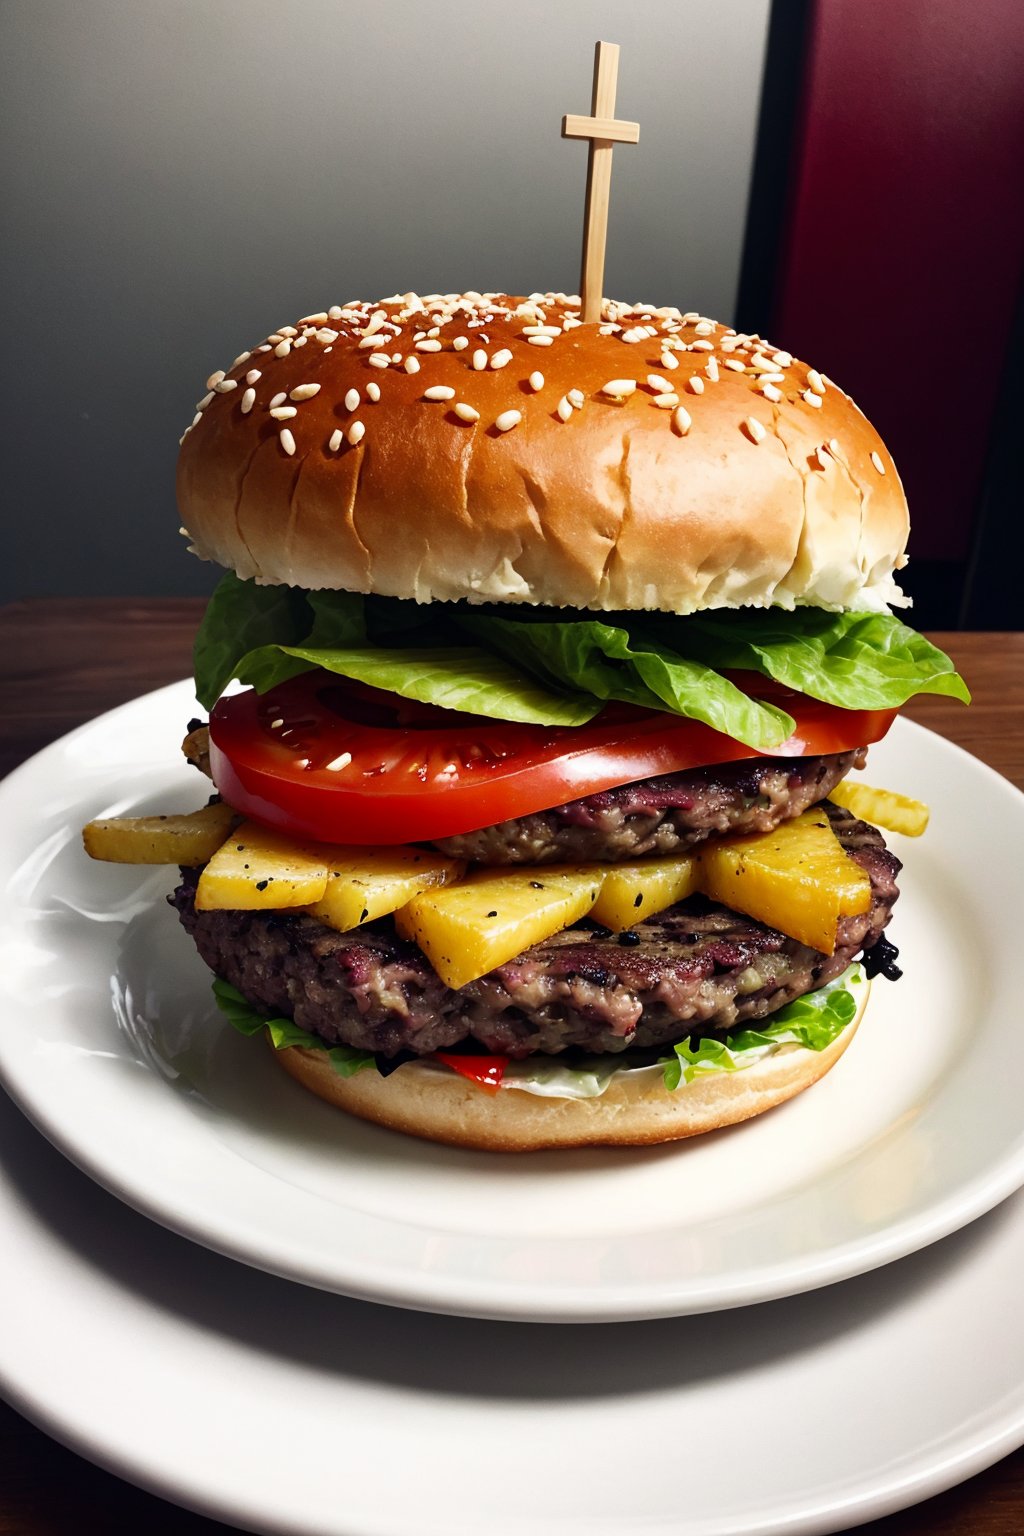 raw, photorealistic, real,  , juicy burger on plate and fries on side,
phenomenal image, too good, ,this is quality, sharp, perfect, beautiful, , ultrarealistic, soft lighting, 8k,  